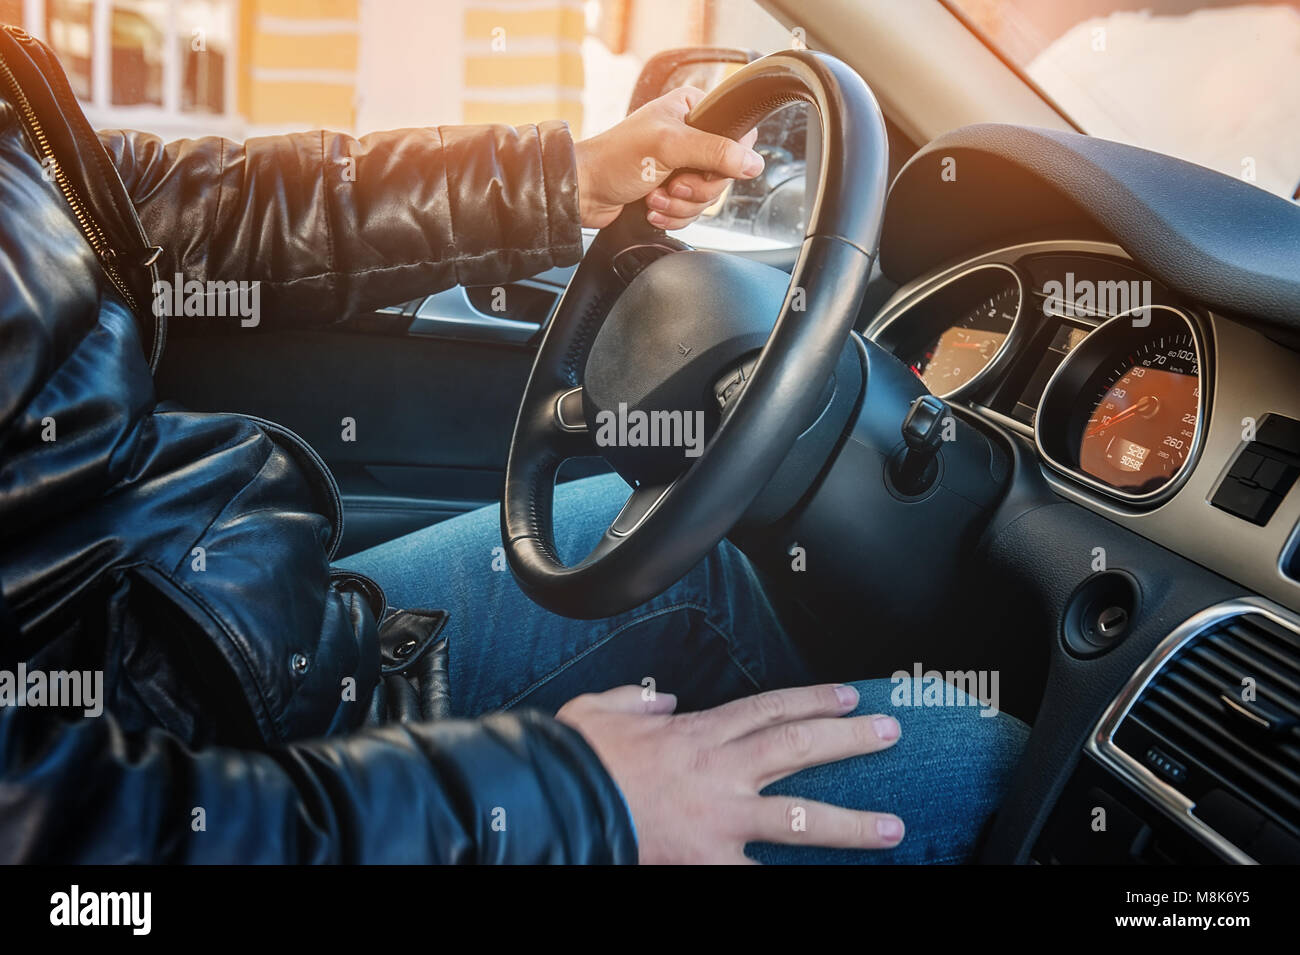 A large man in a leather jacket and jeans sits behind the wheel of a car. Stock Photo